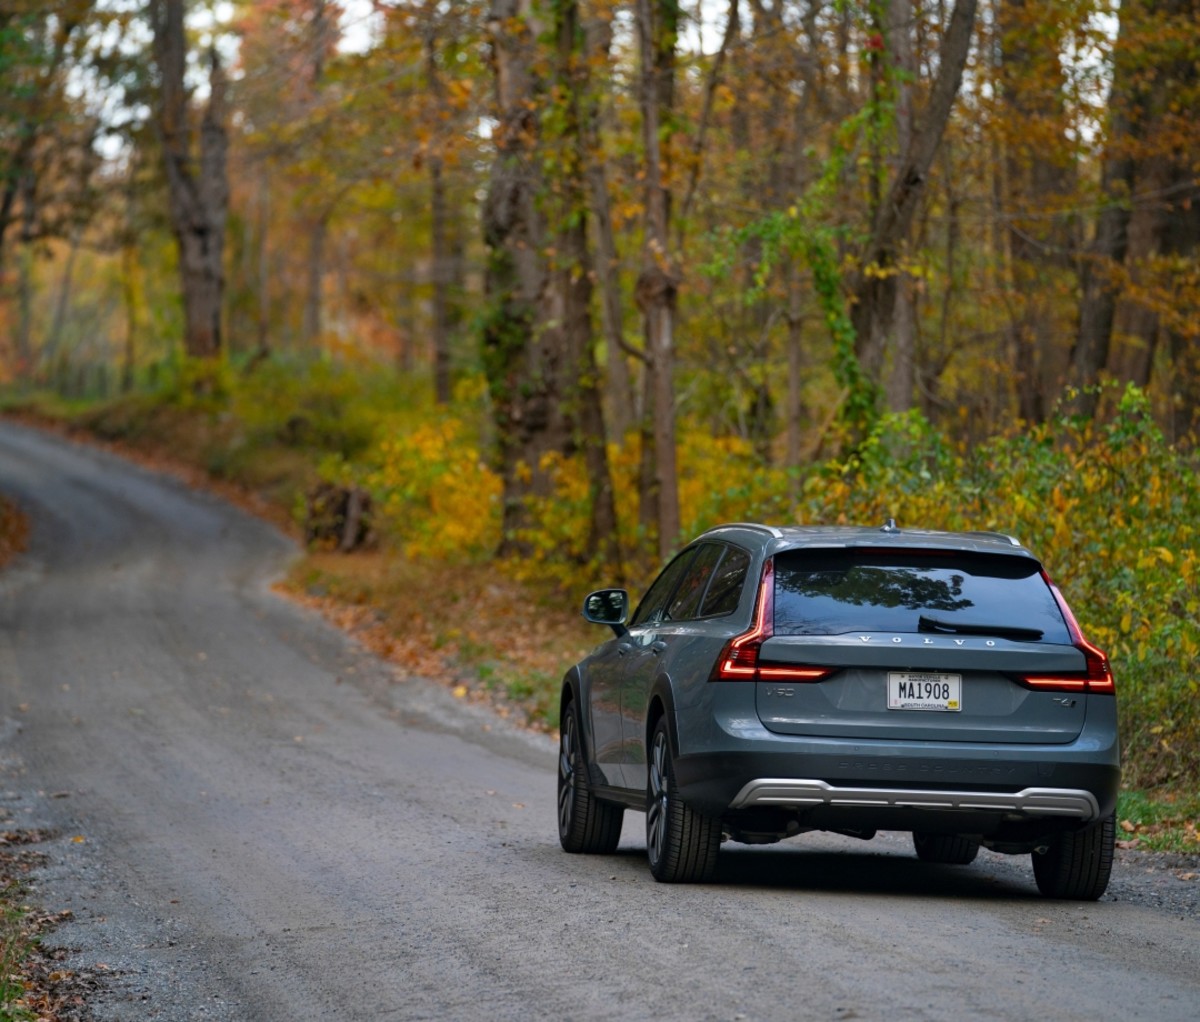 Volvo V90 Cross Country on a gravel road in fall